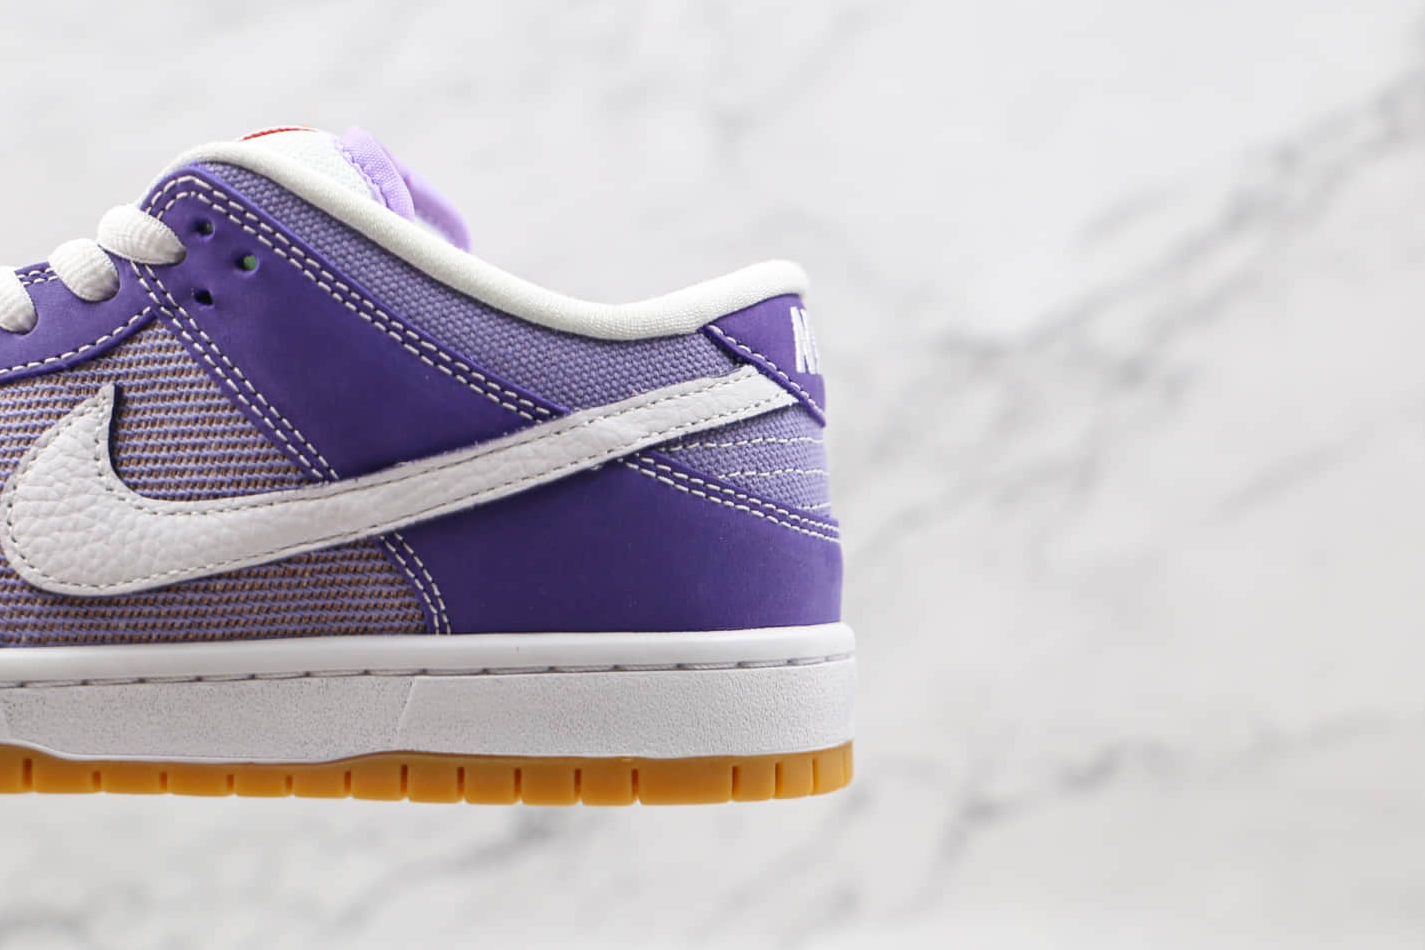 Nike Dunk Low SB 'Unbleached Pack - Lilac' DA9658-500 | Stylish and Comfortable Skateboarding Shoes